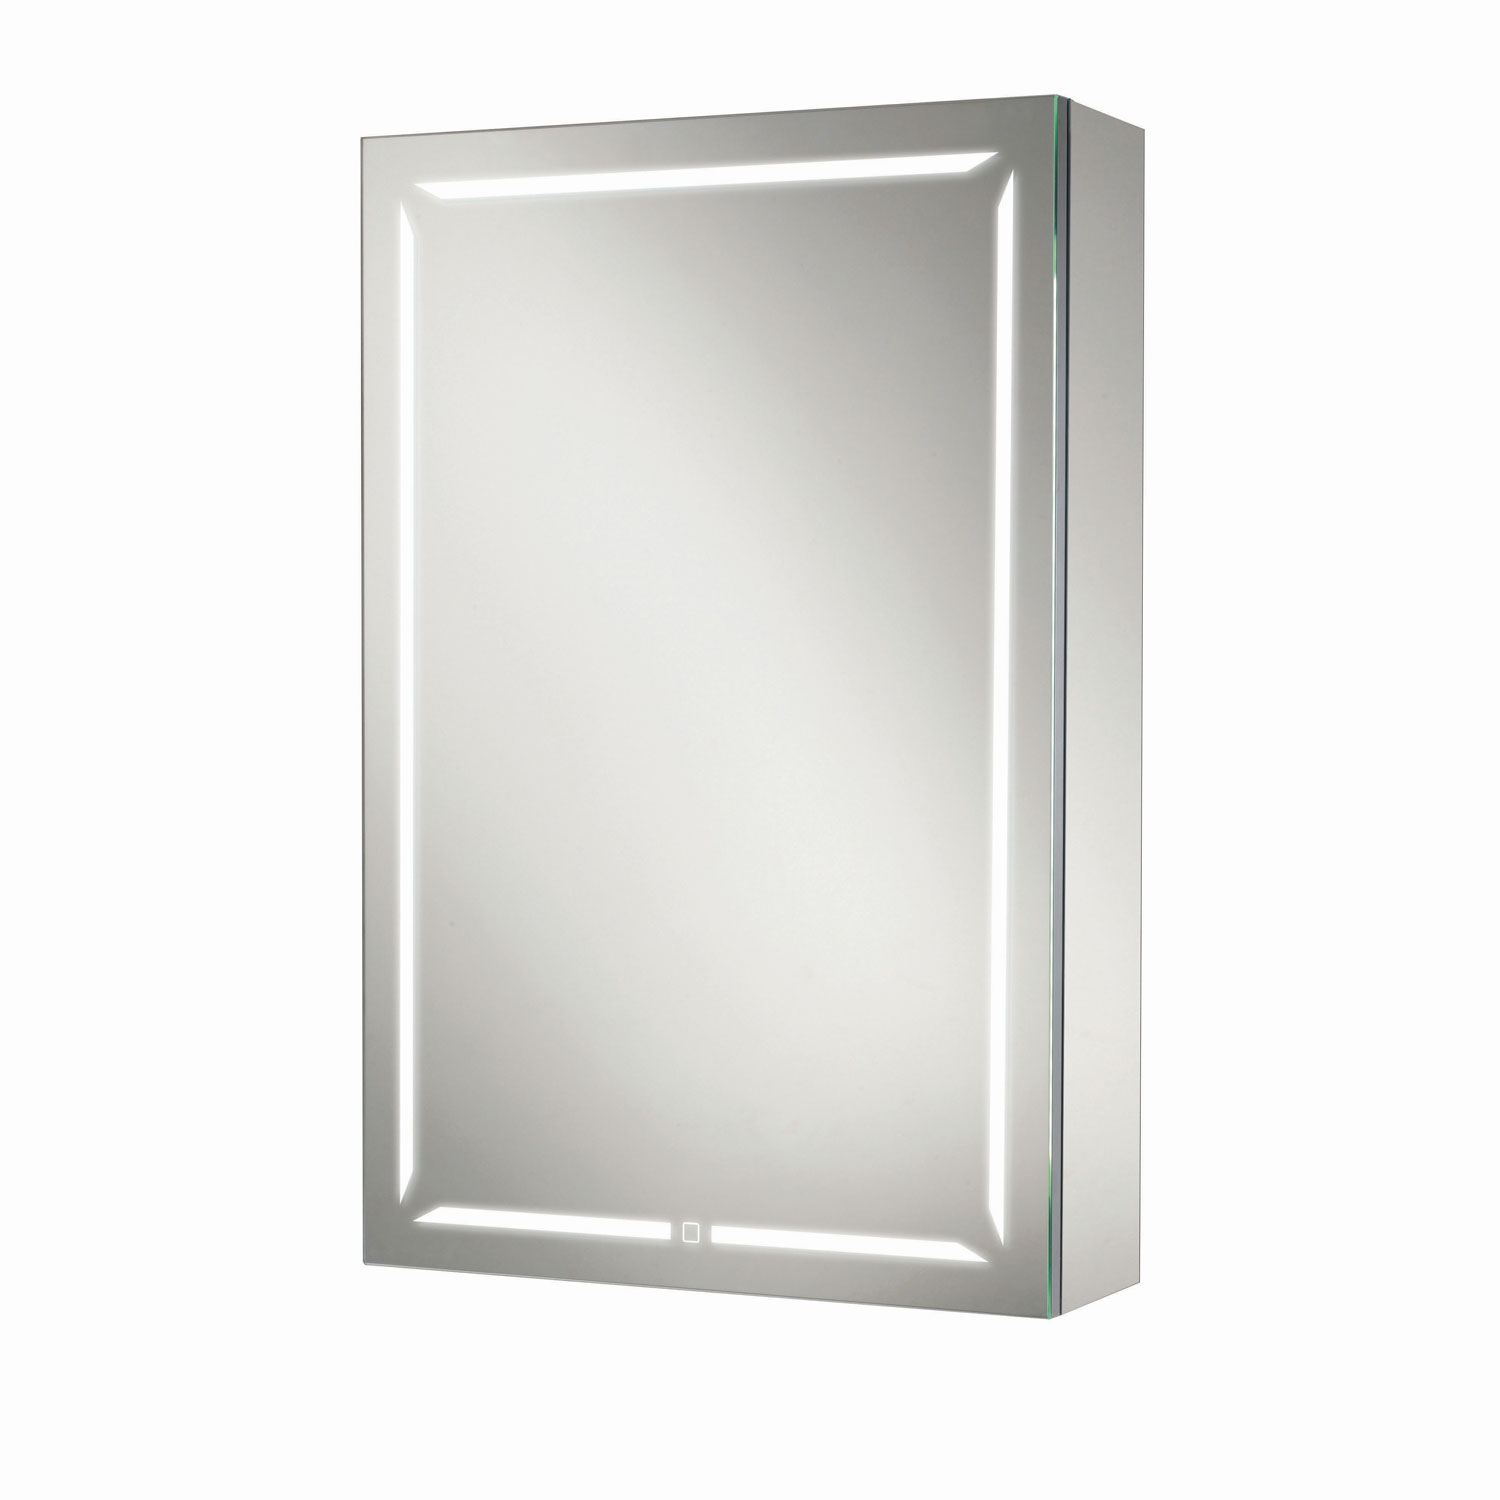 Hib Groove Bathroom Cabinet 48400 500mm with size 1500 X 1500